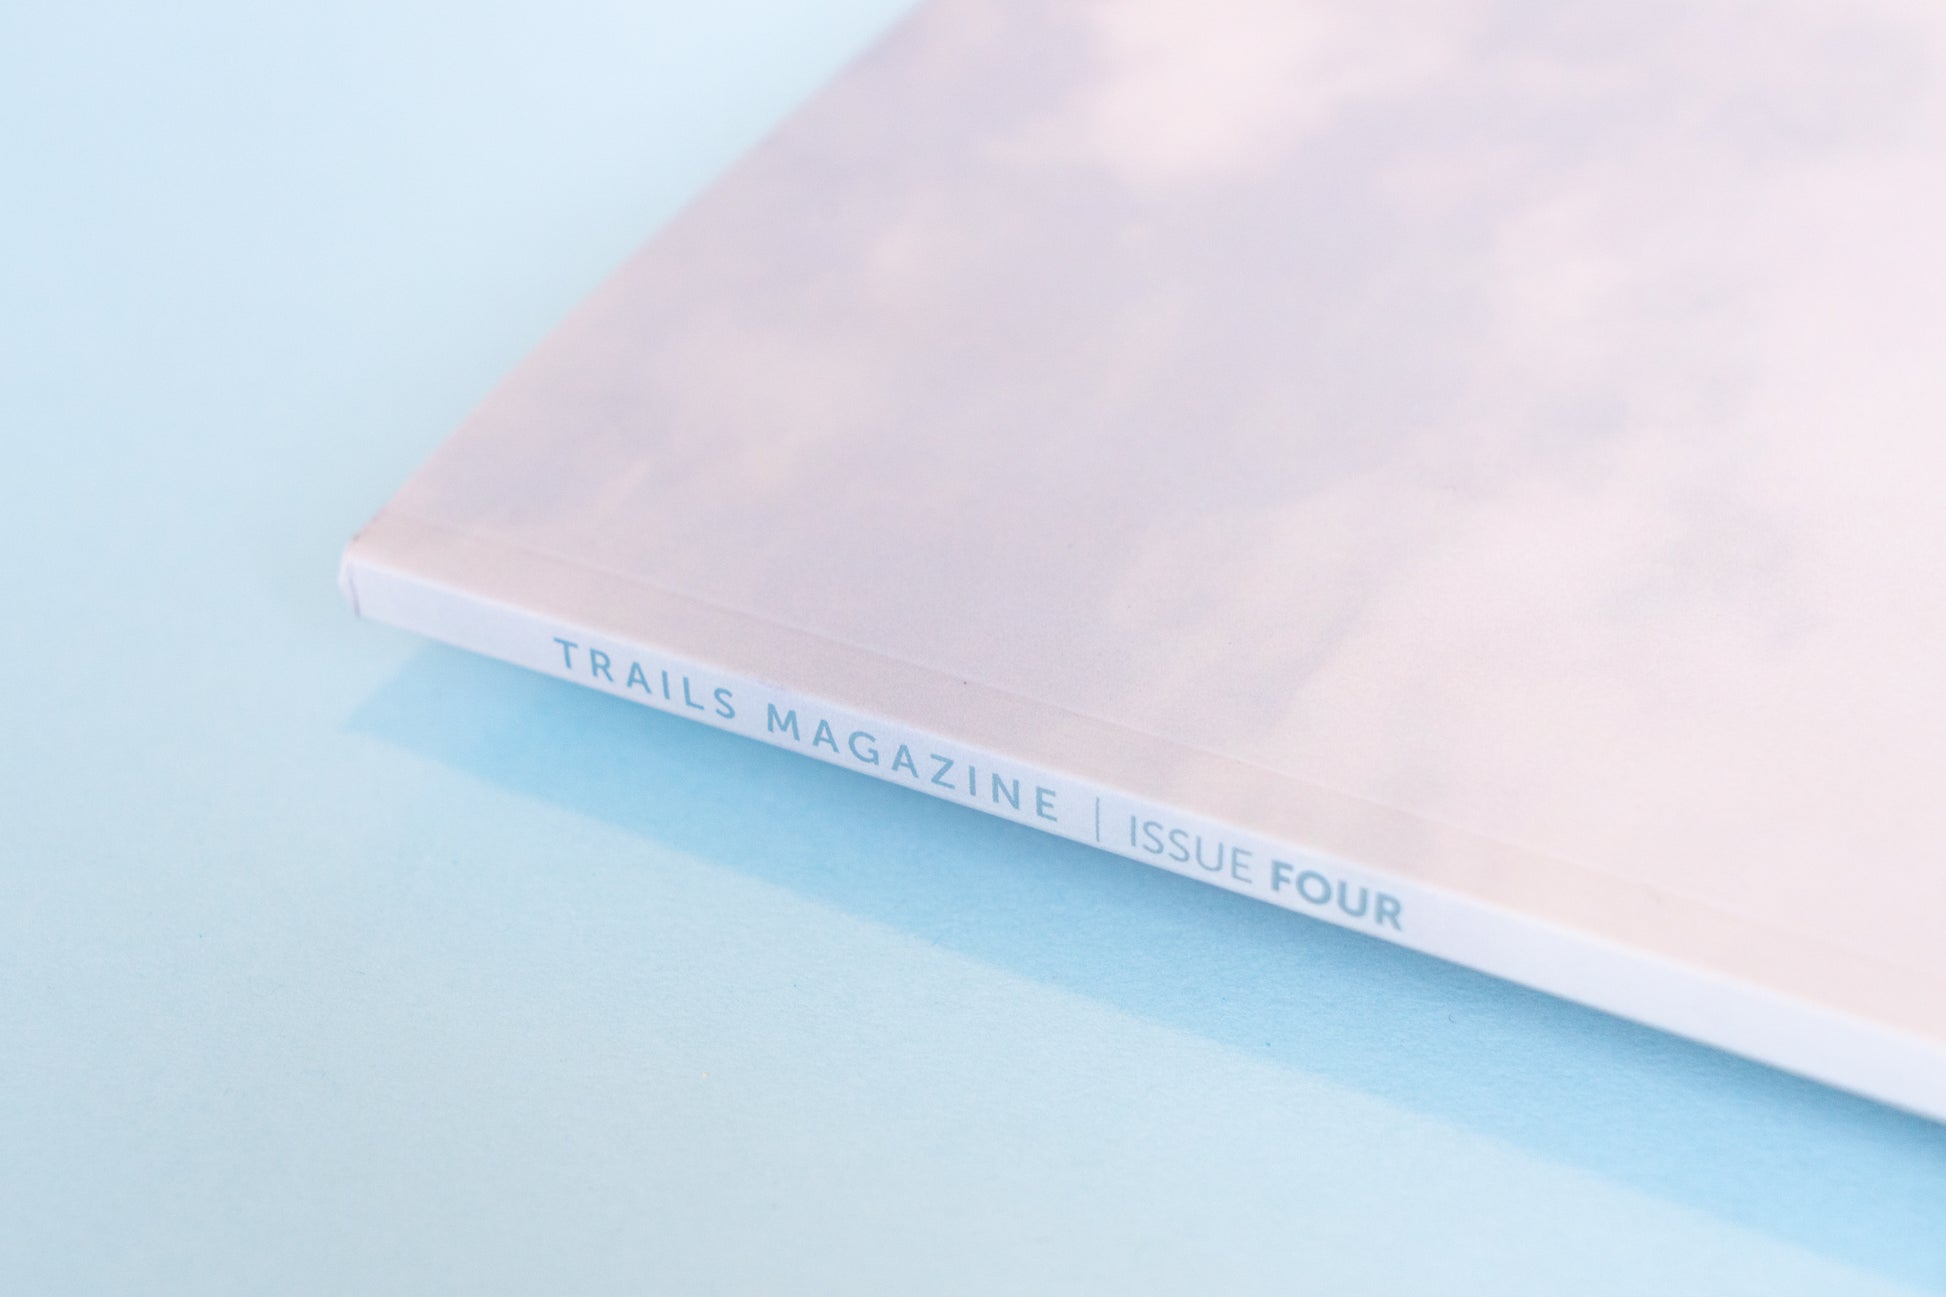 The binding of a magazine, displaying a bright and cloudy sky lays across a light blue backdrop. The text along the binding reads, "Trails Magazine Issue Four" in light blue text.